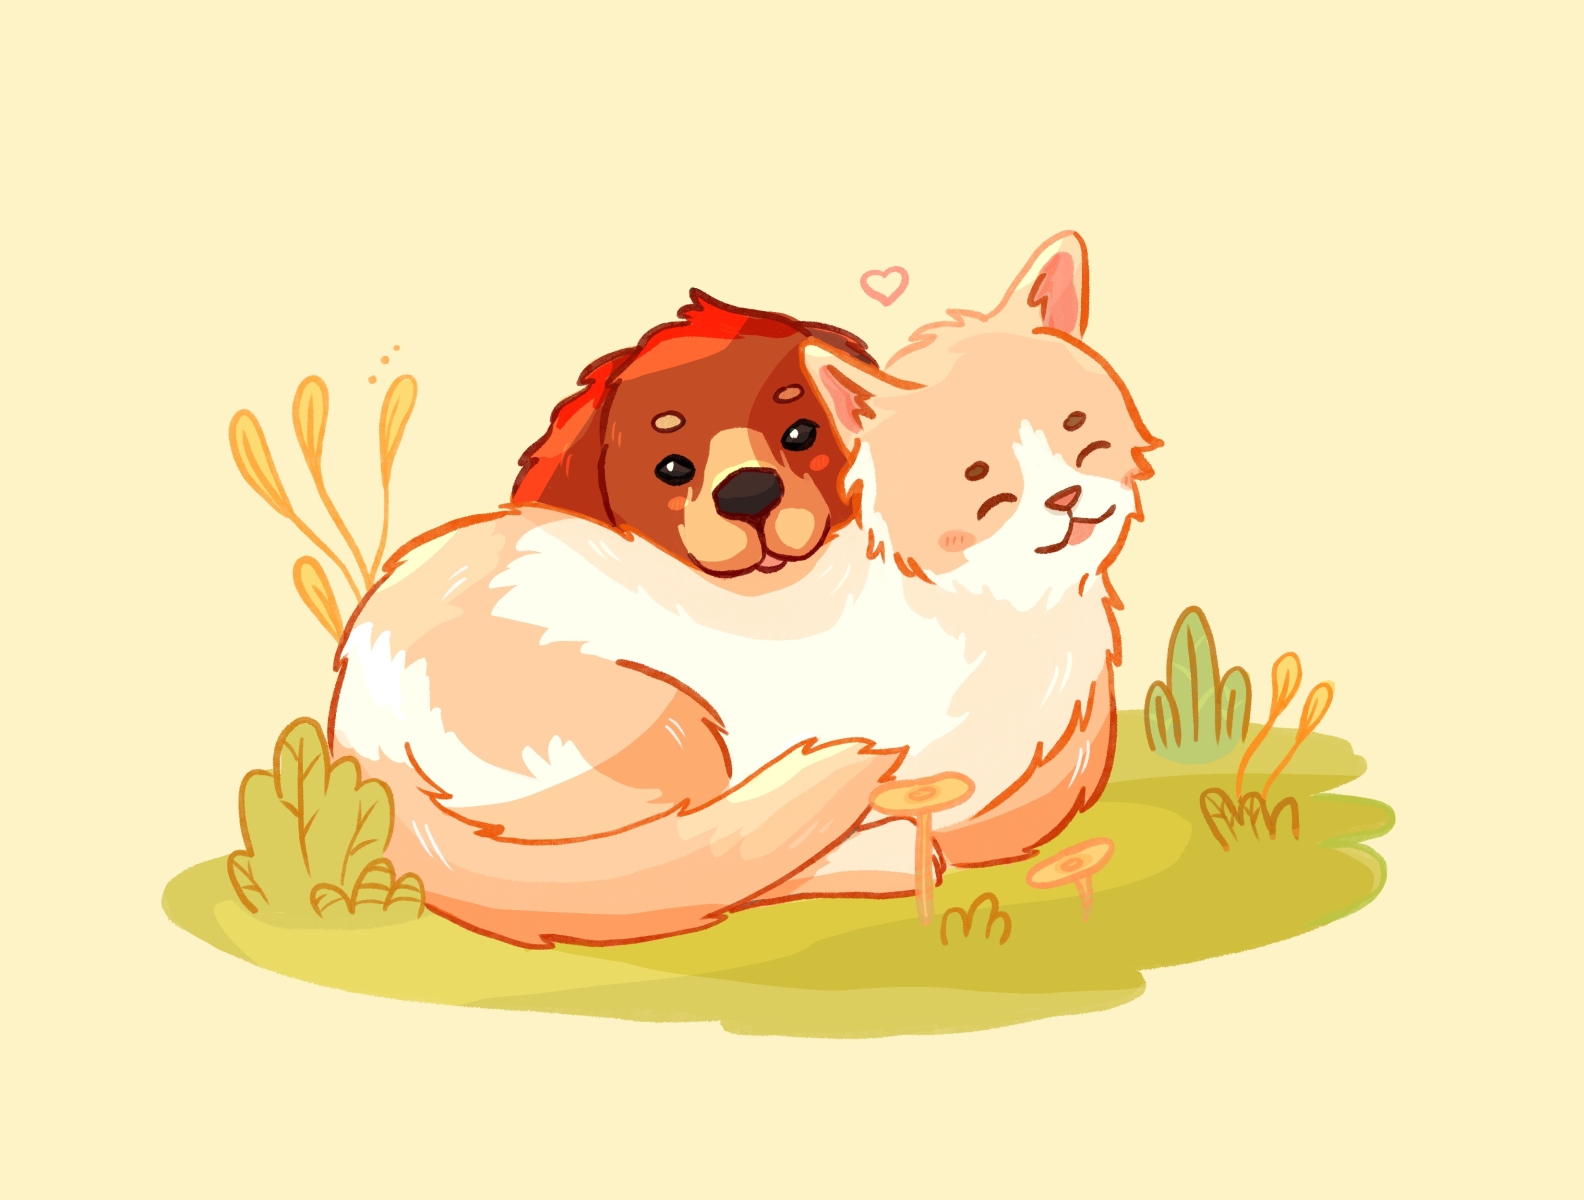 cute puppies and kittens drawings